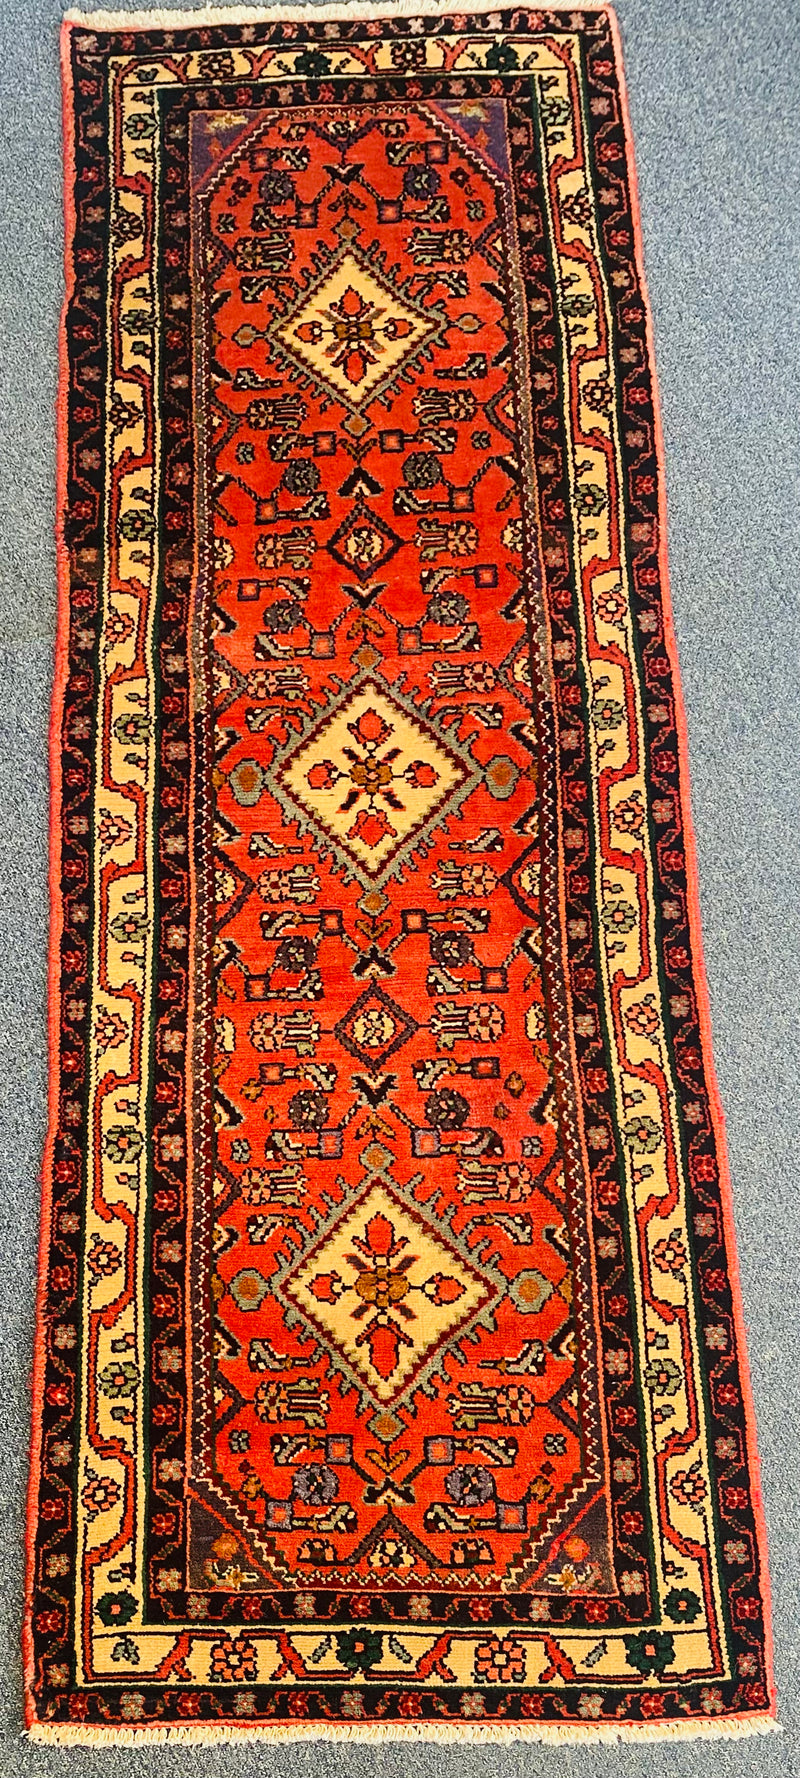 Hamadan Hand Knotted Traditional Runner Rug, 220 cm x 70 cm Long Natural Wool Runner Rug for Hallway/Corridor, Unique Home Decor